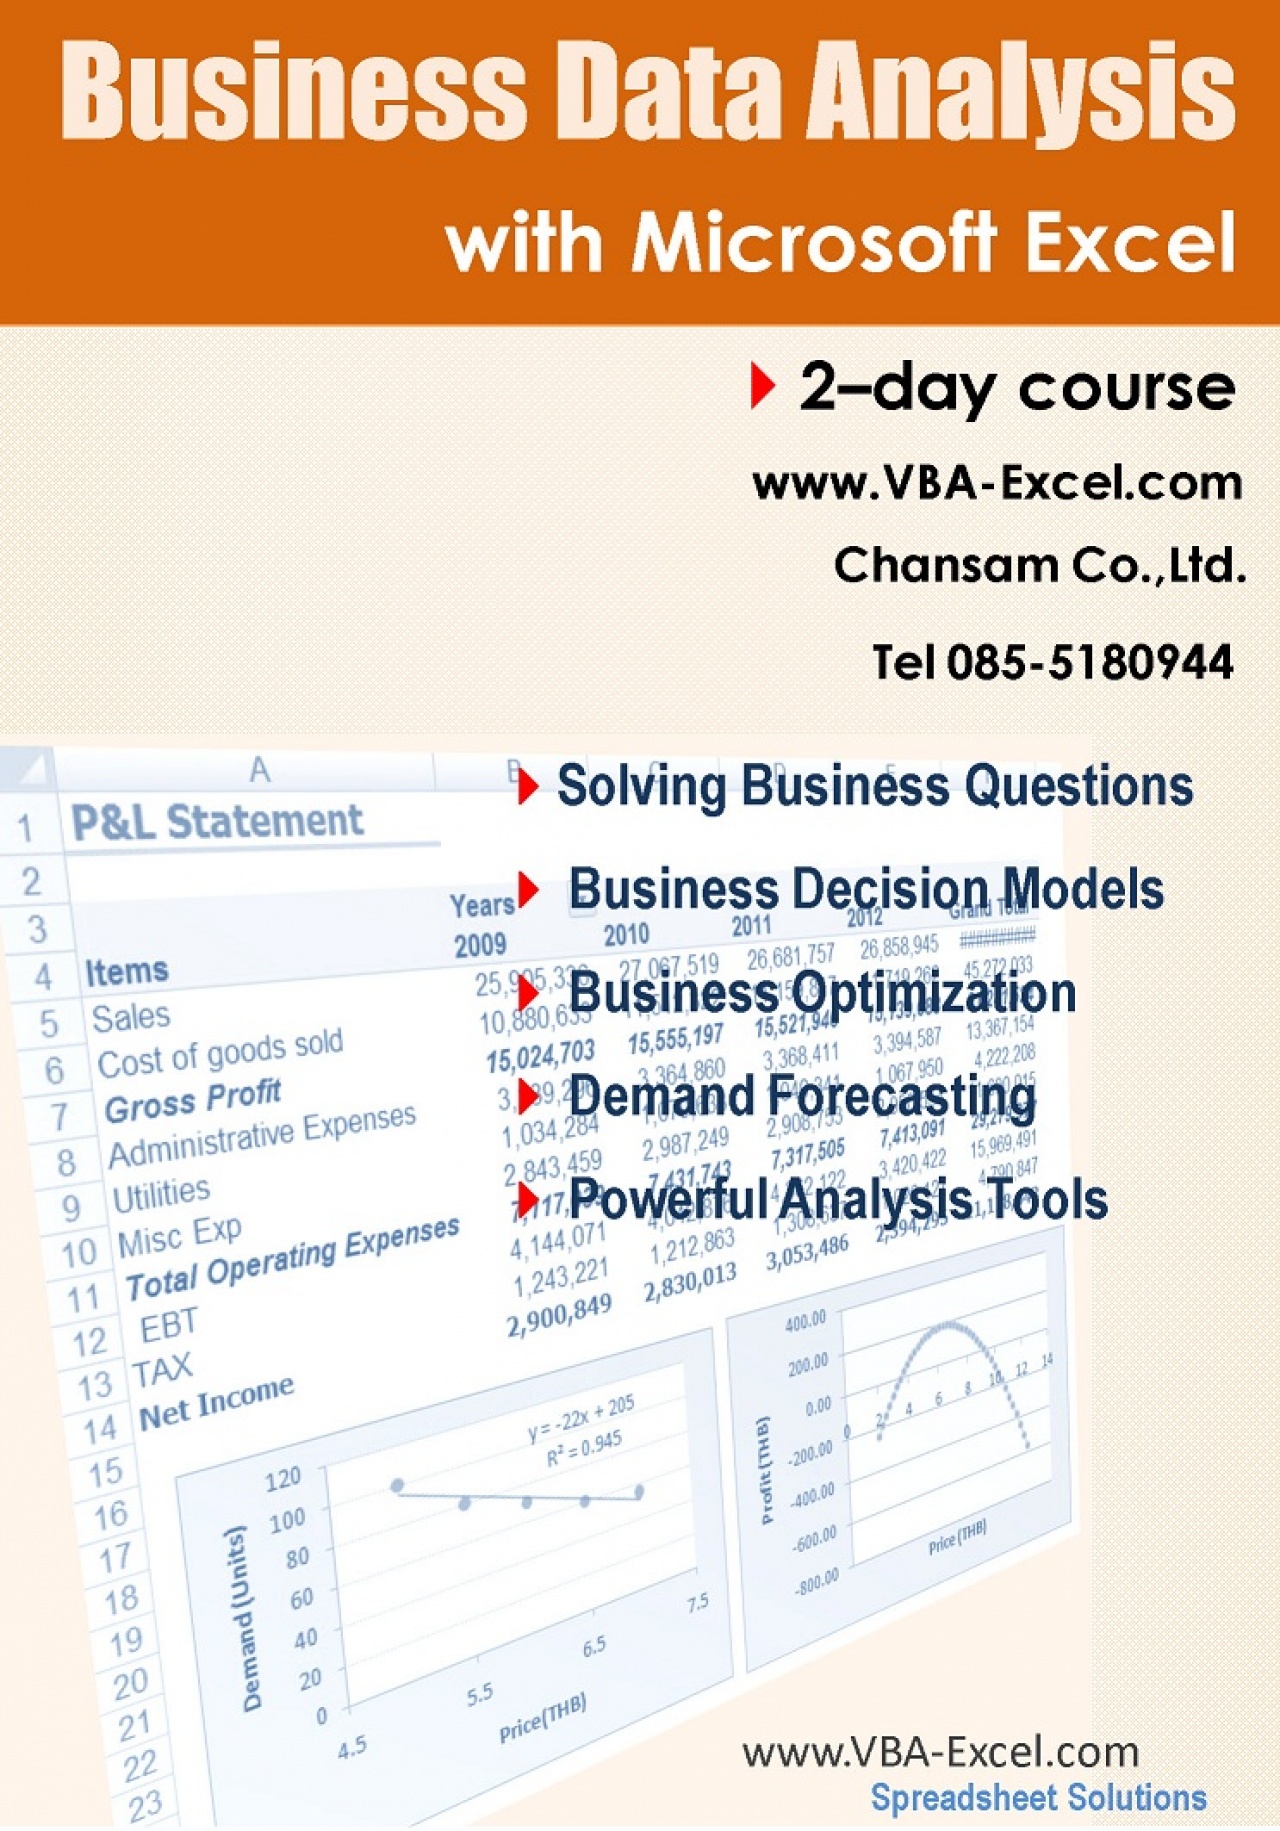 EXCEL FOR BUSINESS DATA ANALYSIS